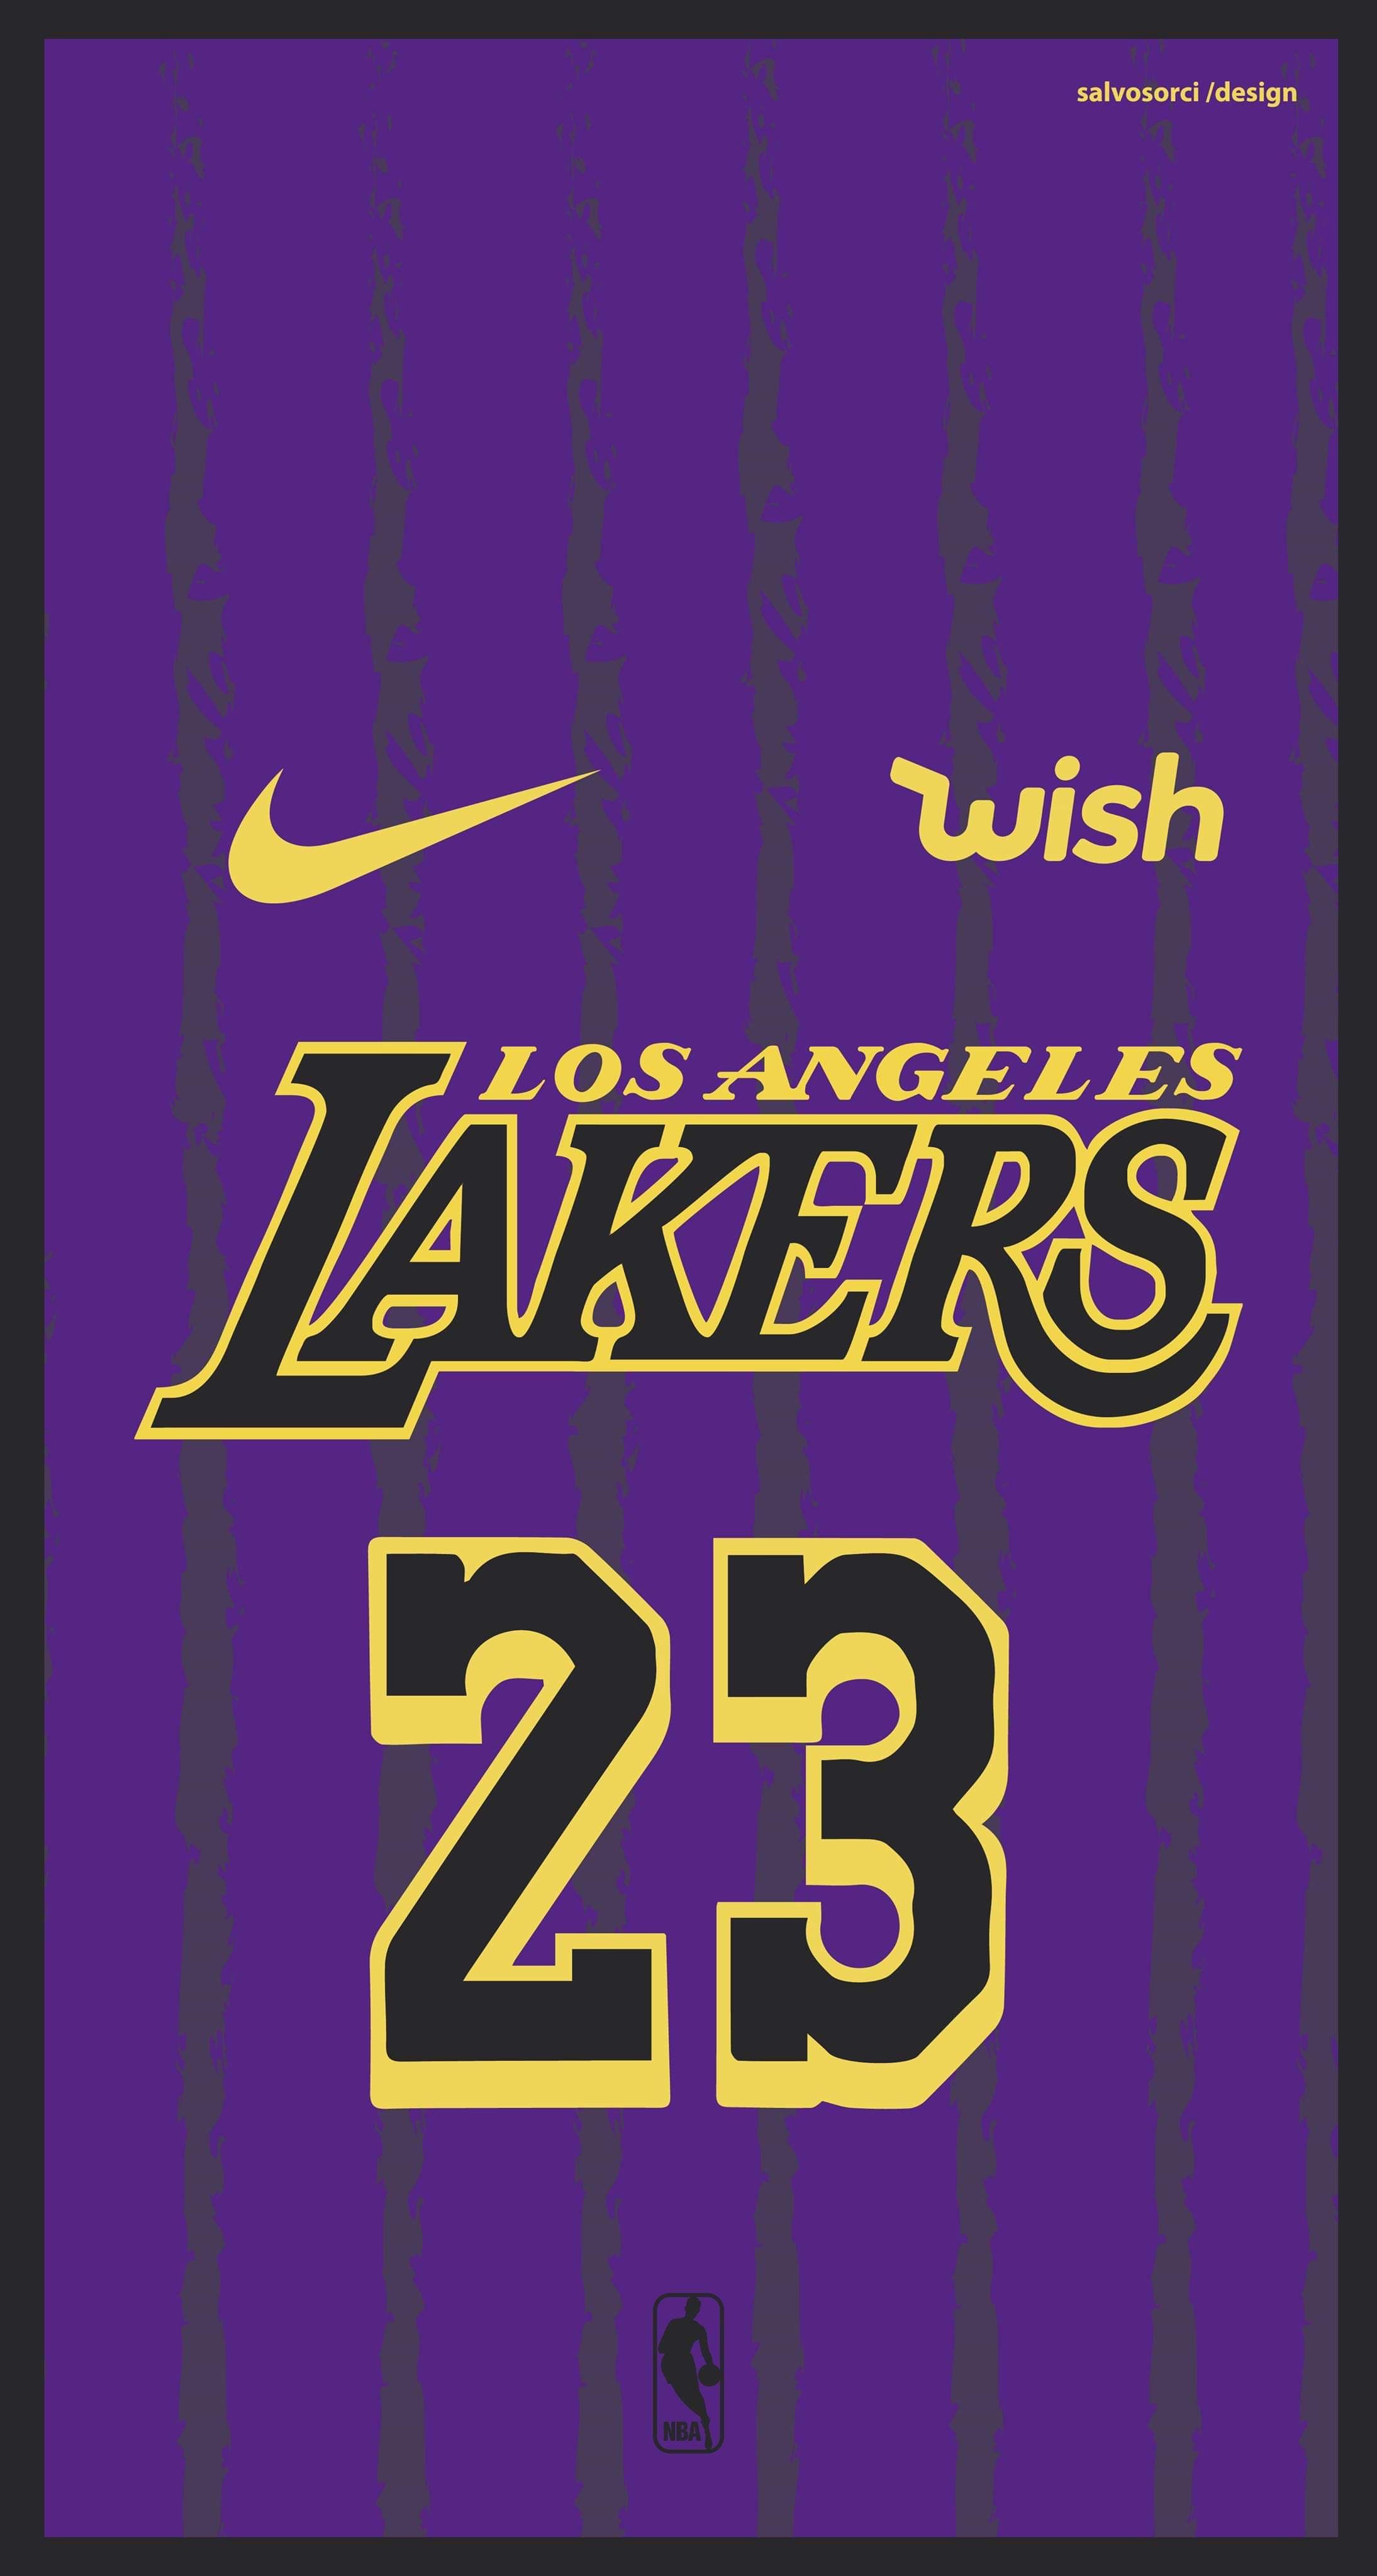 Logos And Uniforms Of The Los Angeles Lakers - HD Wallpaper 